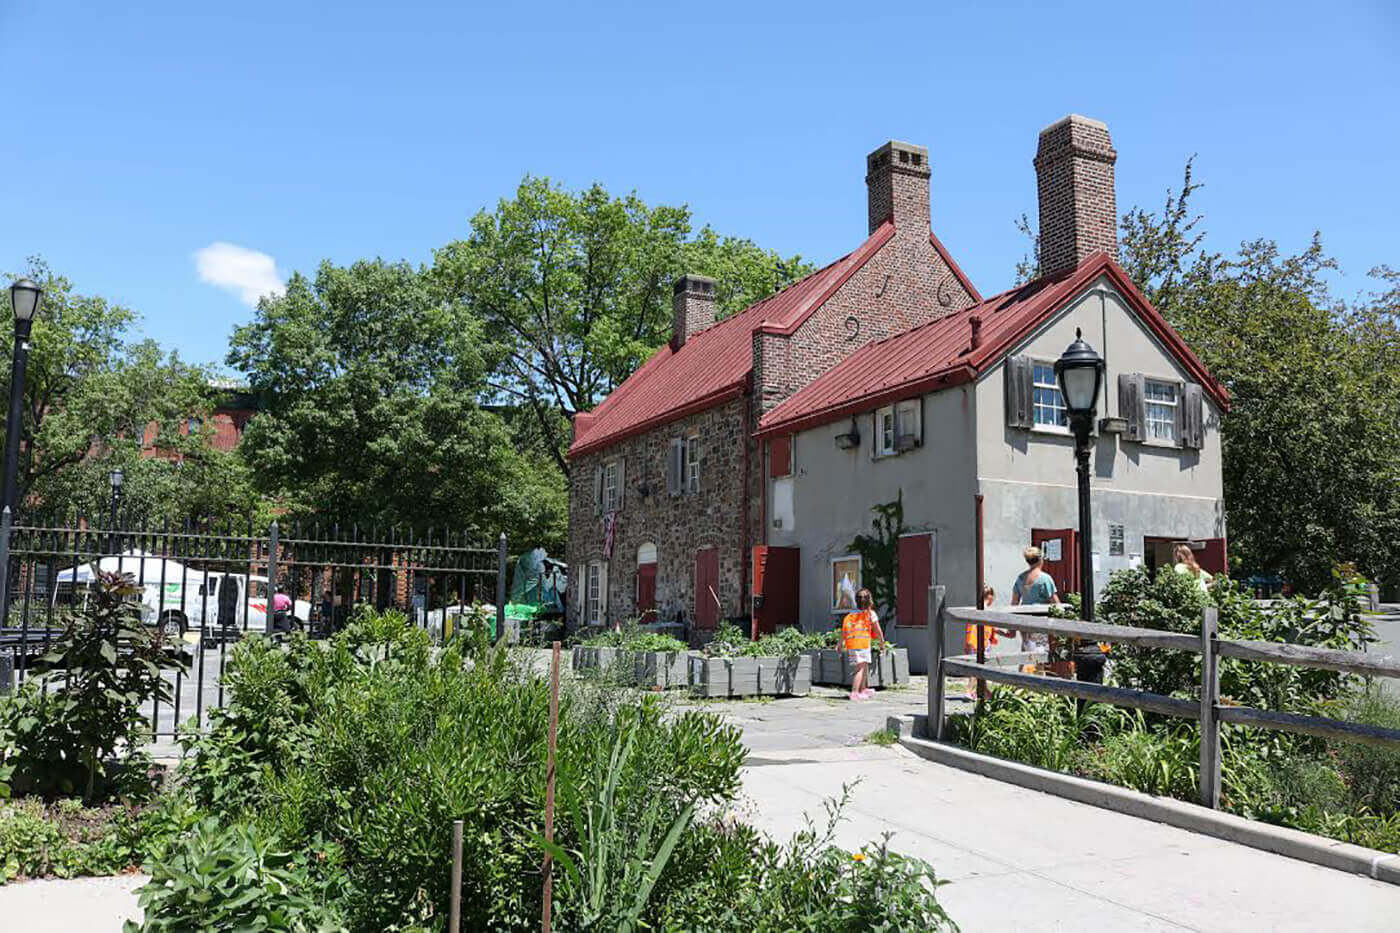 The event will take place at Old Stone House in Park Slope. Photo by Young Gotham